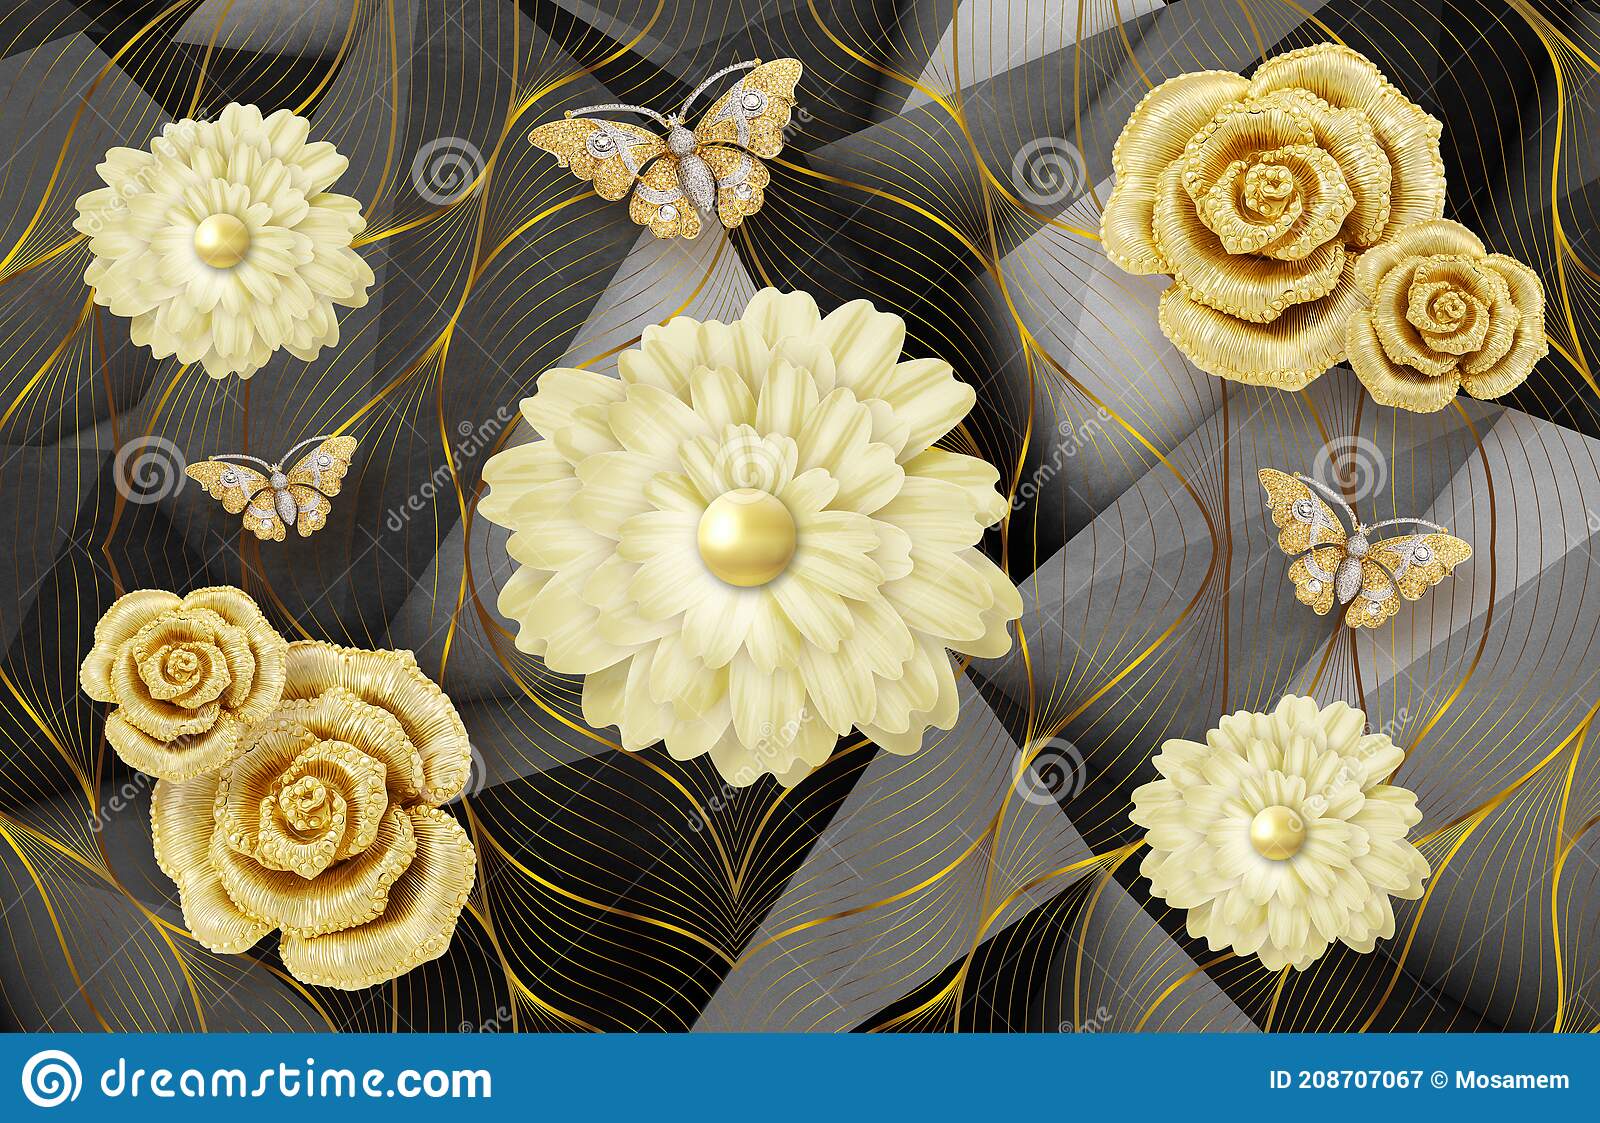 D mural wallpaper for wall abstract black background with golden flowers lines and butterfly stock image